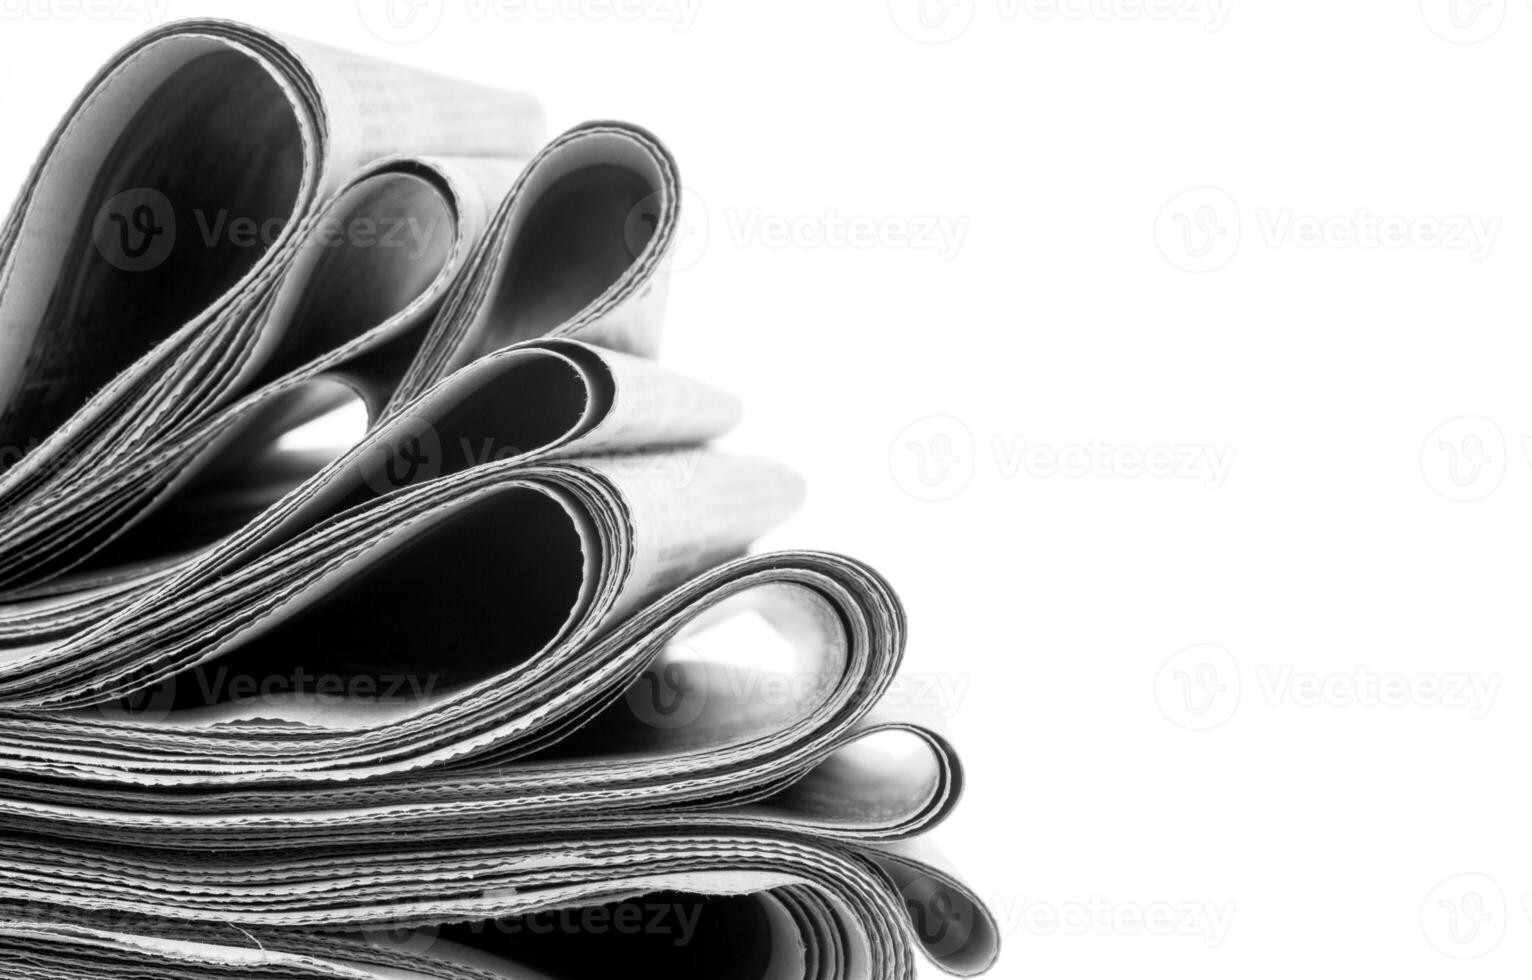 Newspapers folded and stacked photo